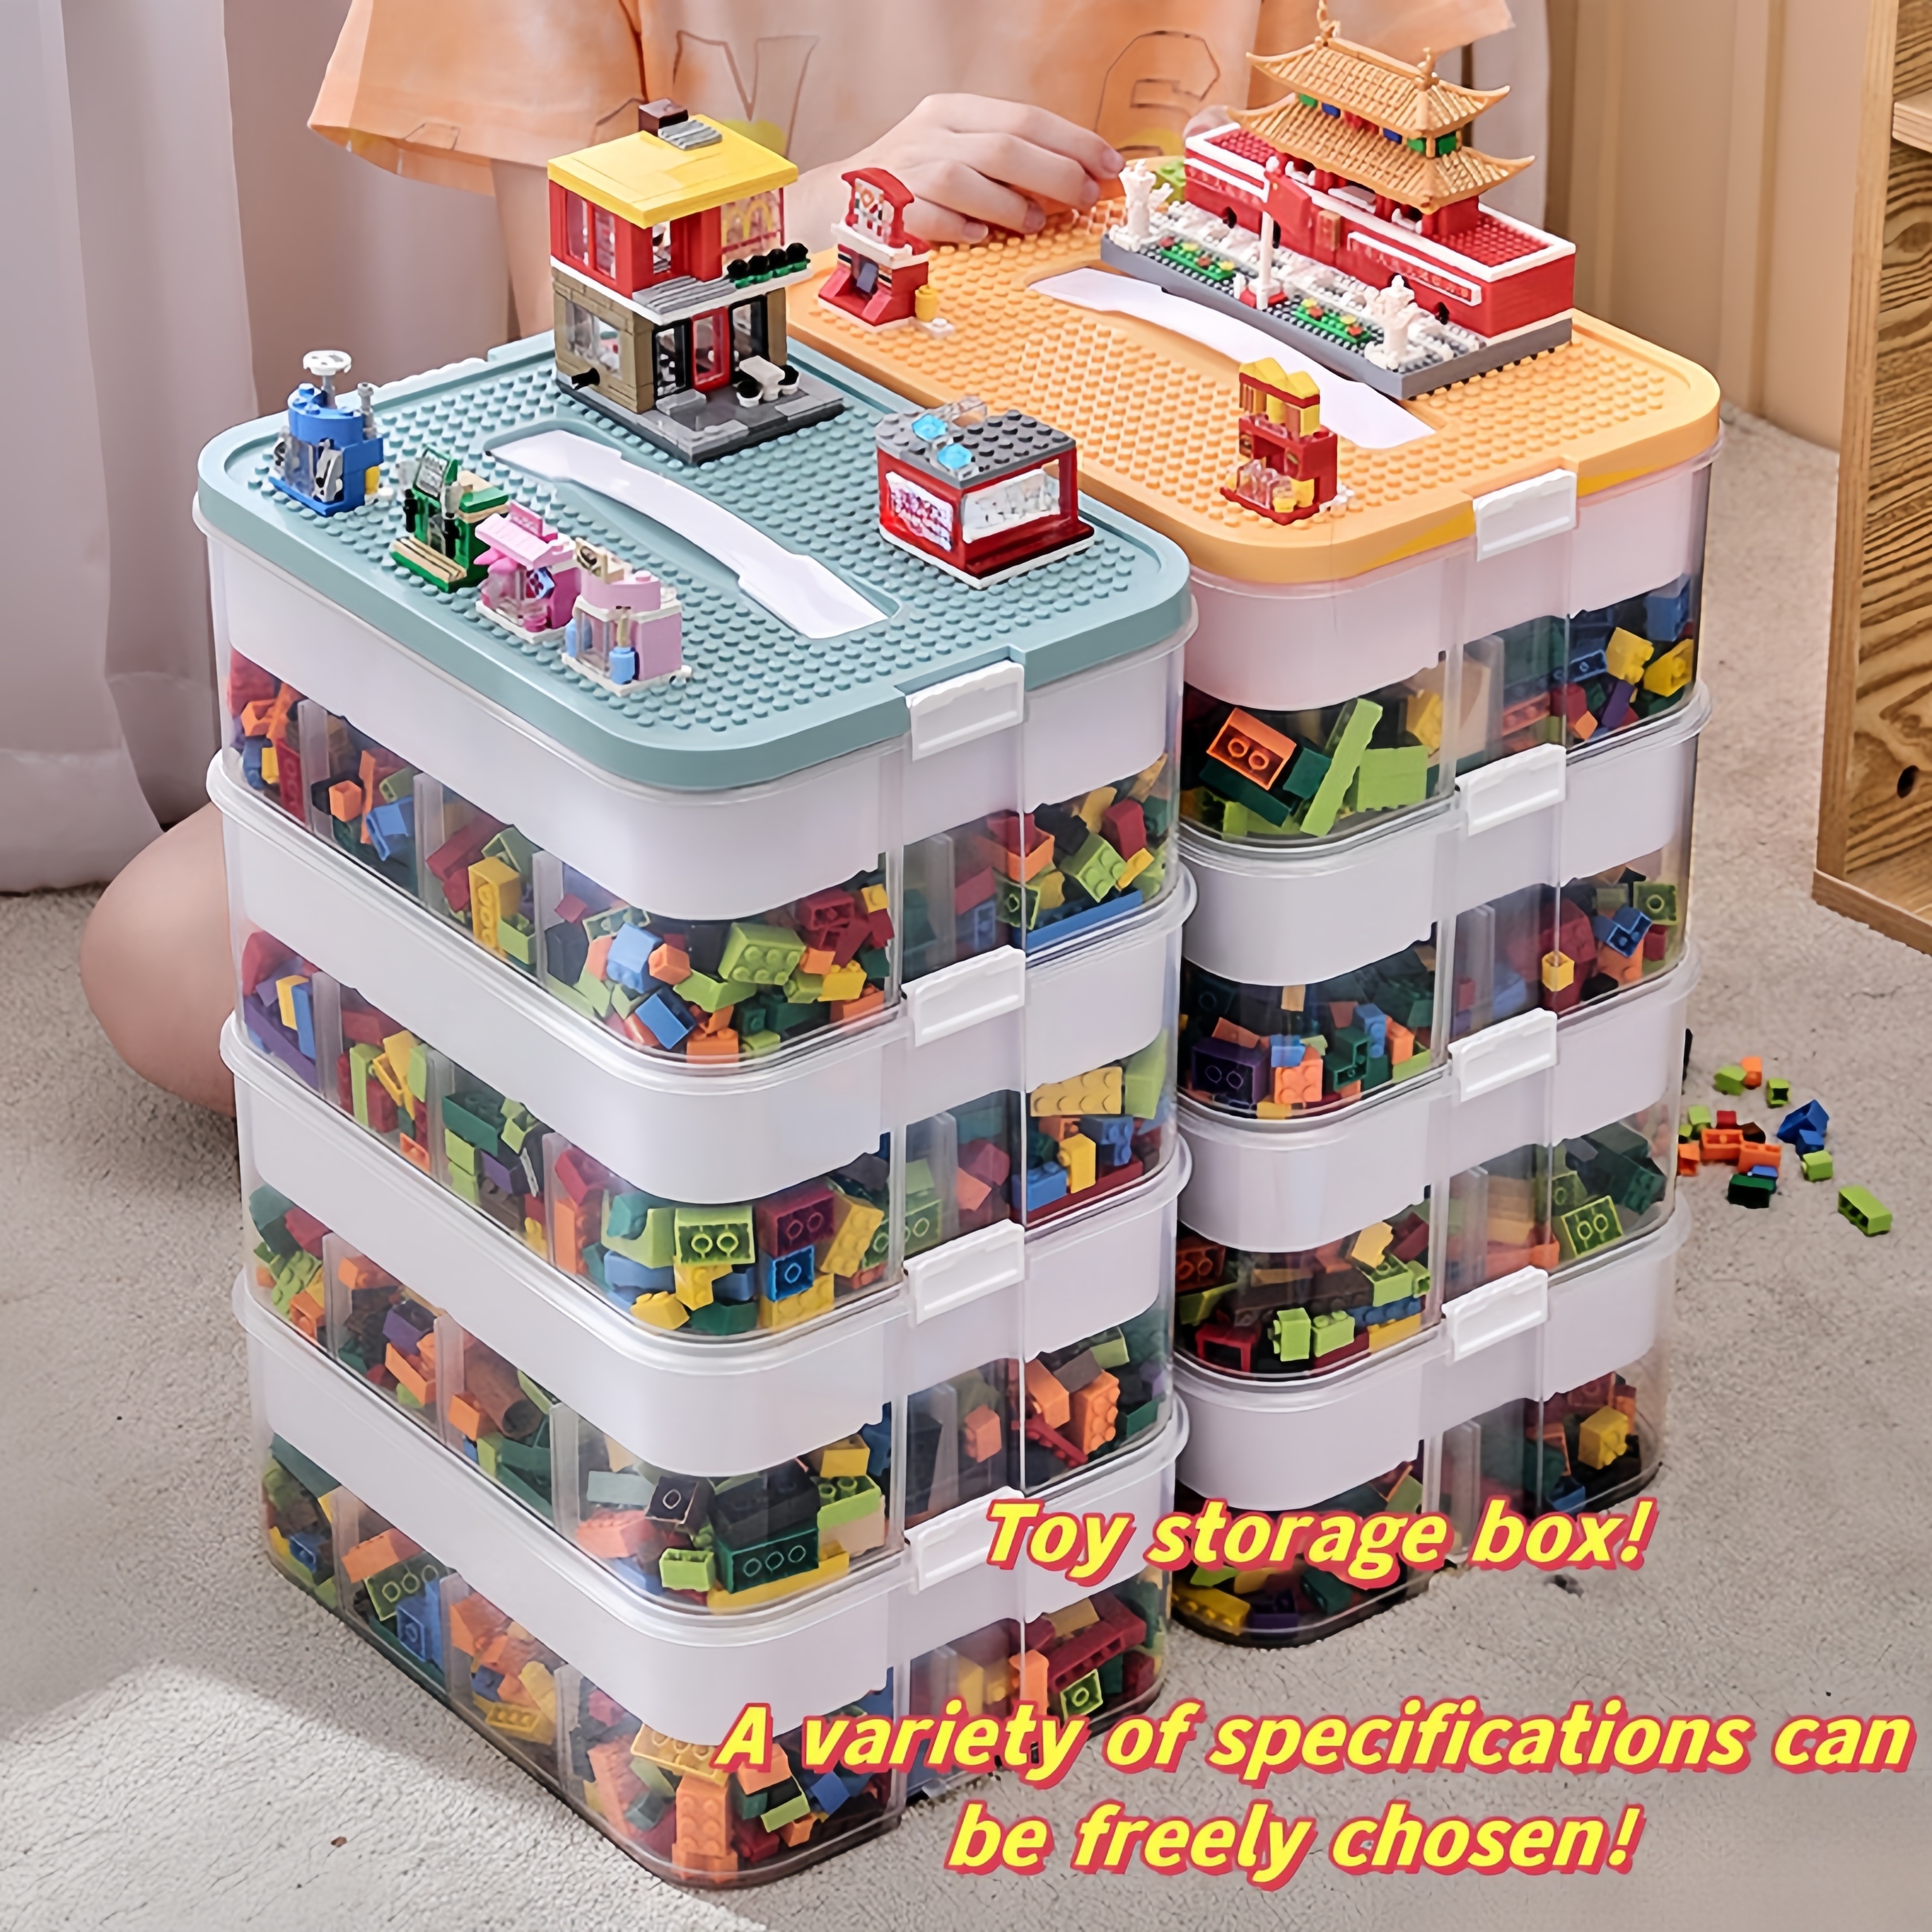 

1pc 1/2/3/4/5-layer Toy Storage Box With Lid & Grids, Large Storage Box For Assembled Building Blocks, Snacks, Small Sundries, Classification Storage Organizer Box For Bedroom, Living Room, Home